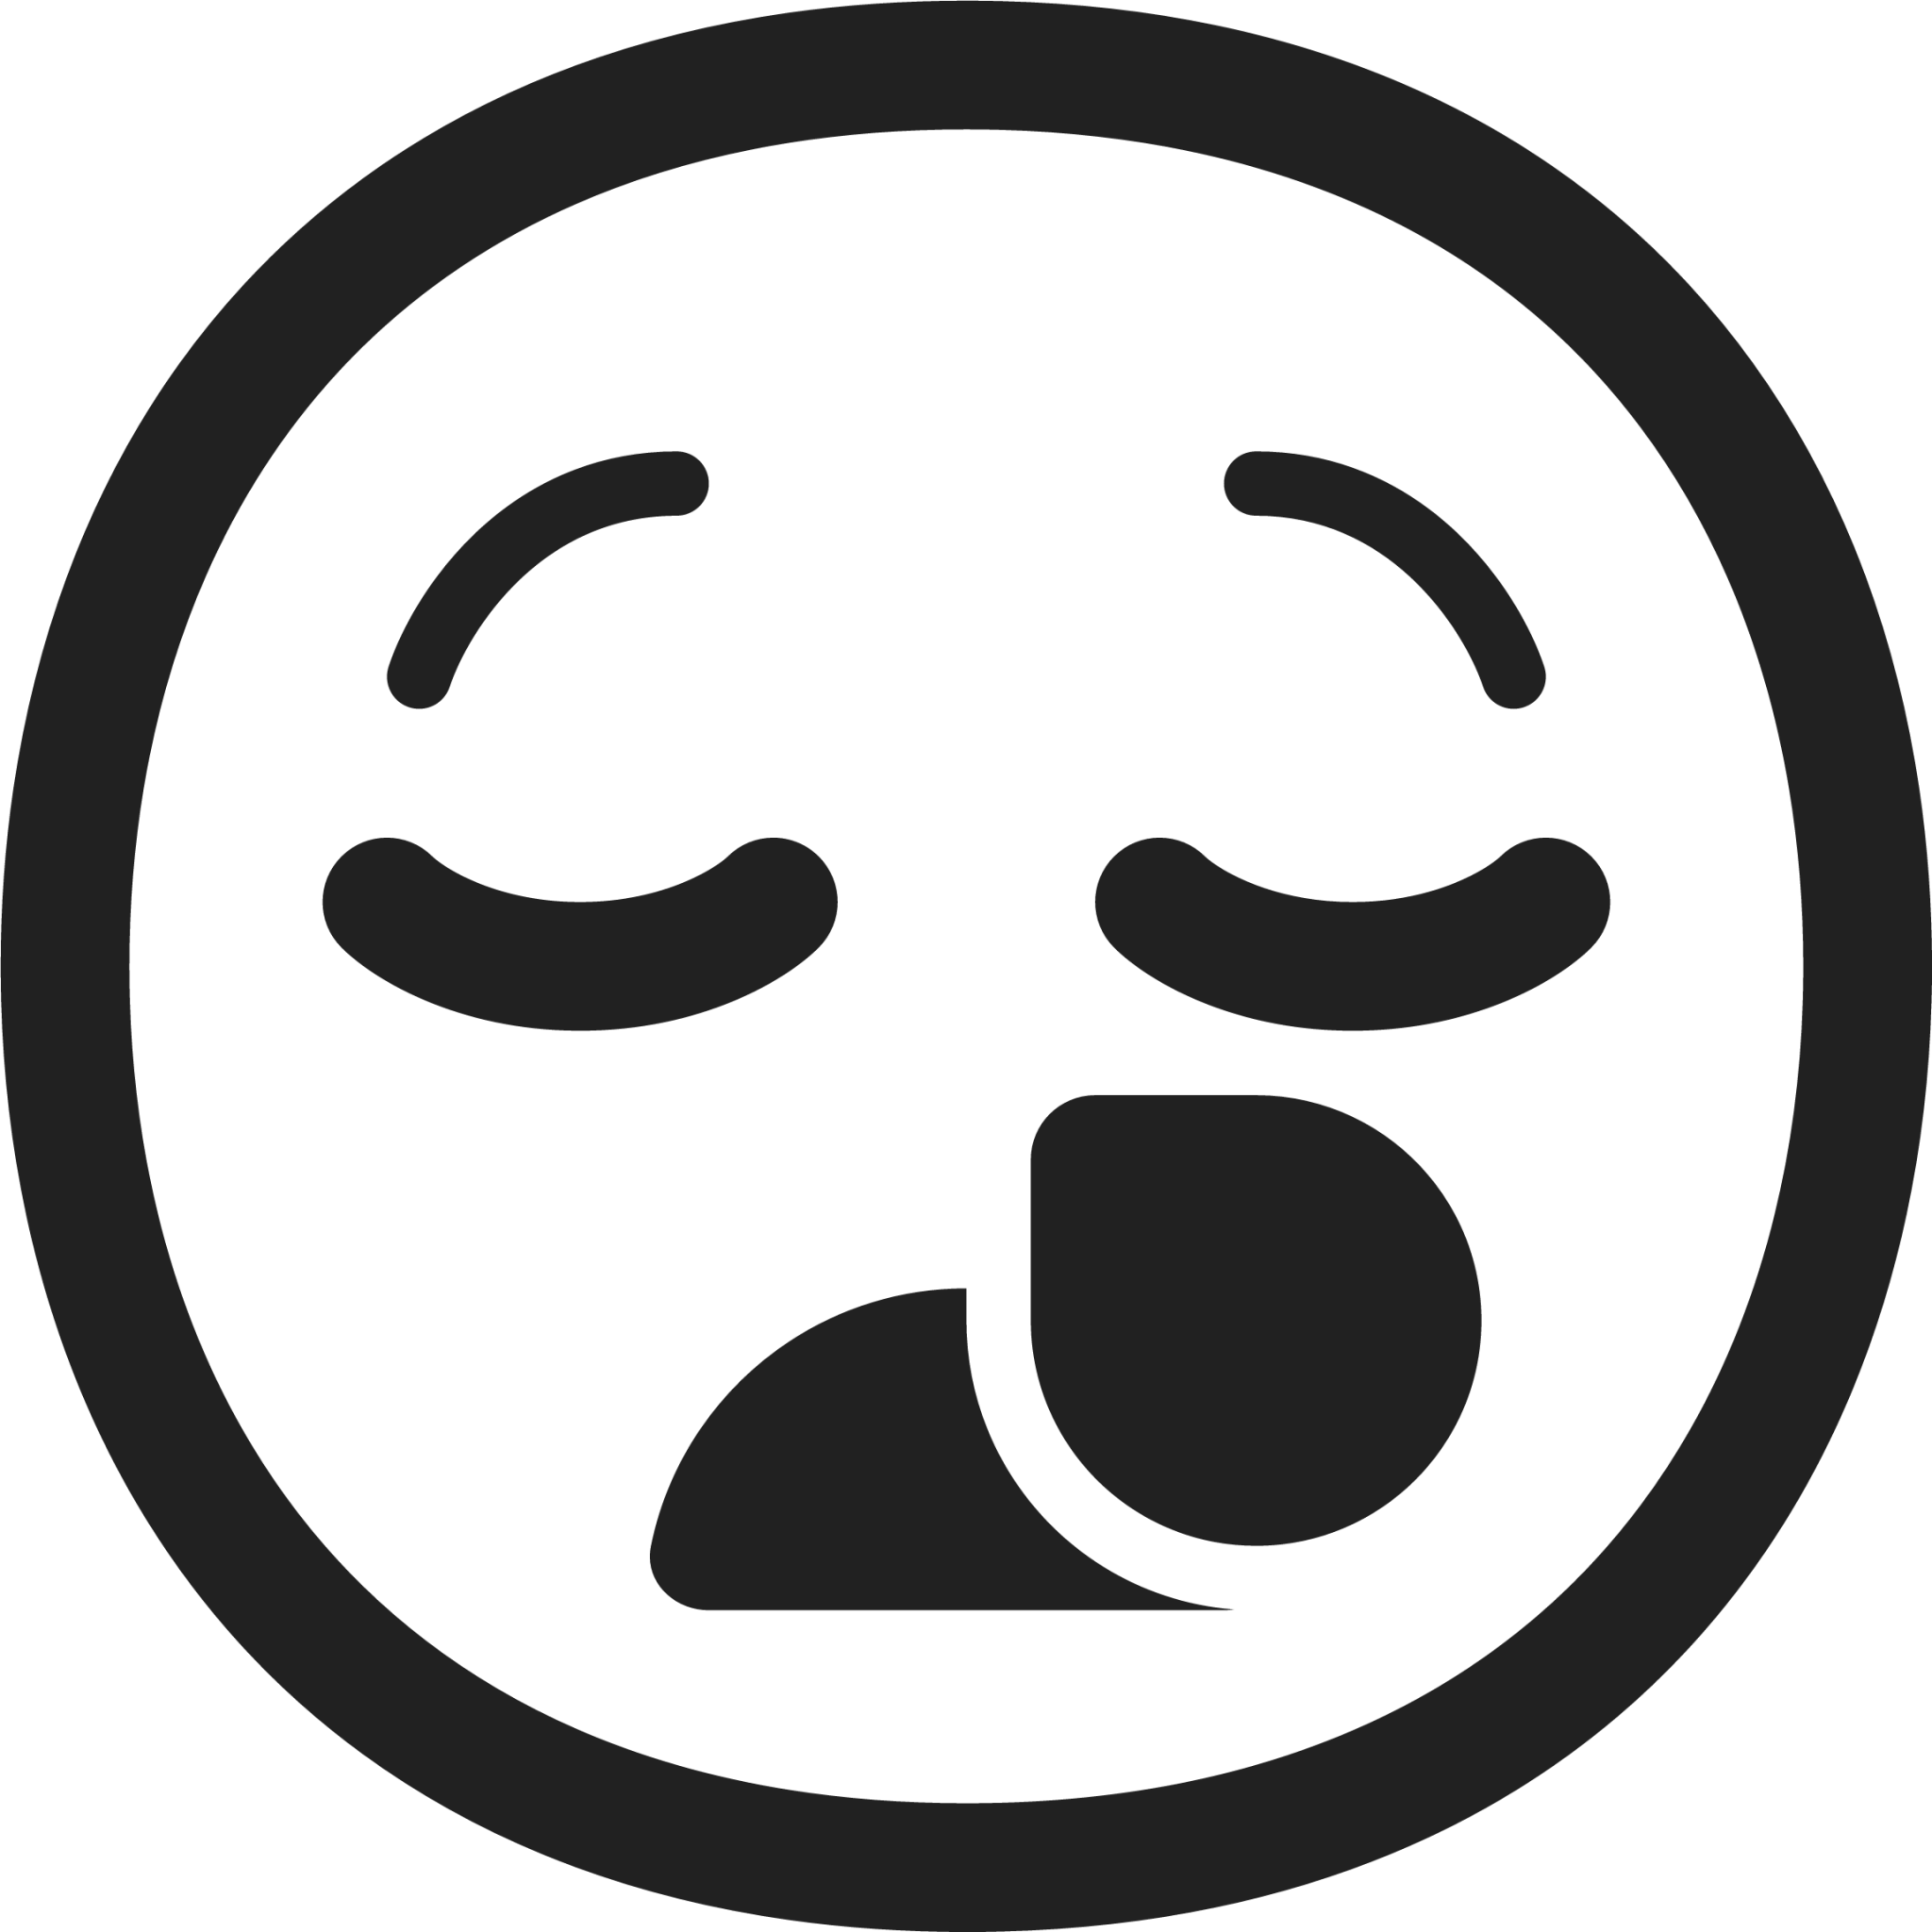 Free Loudly Crying Face Emoji Icon - Download in Line Style